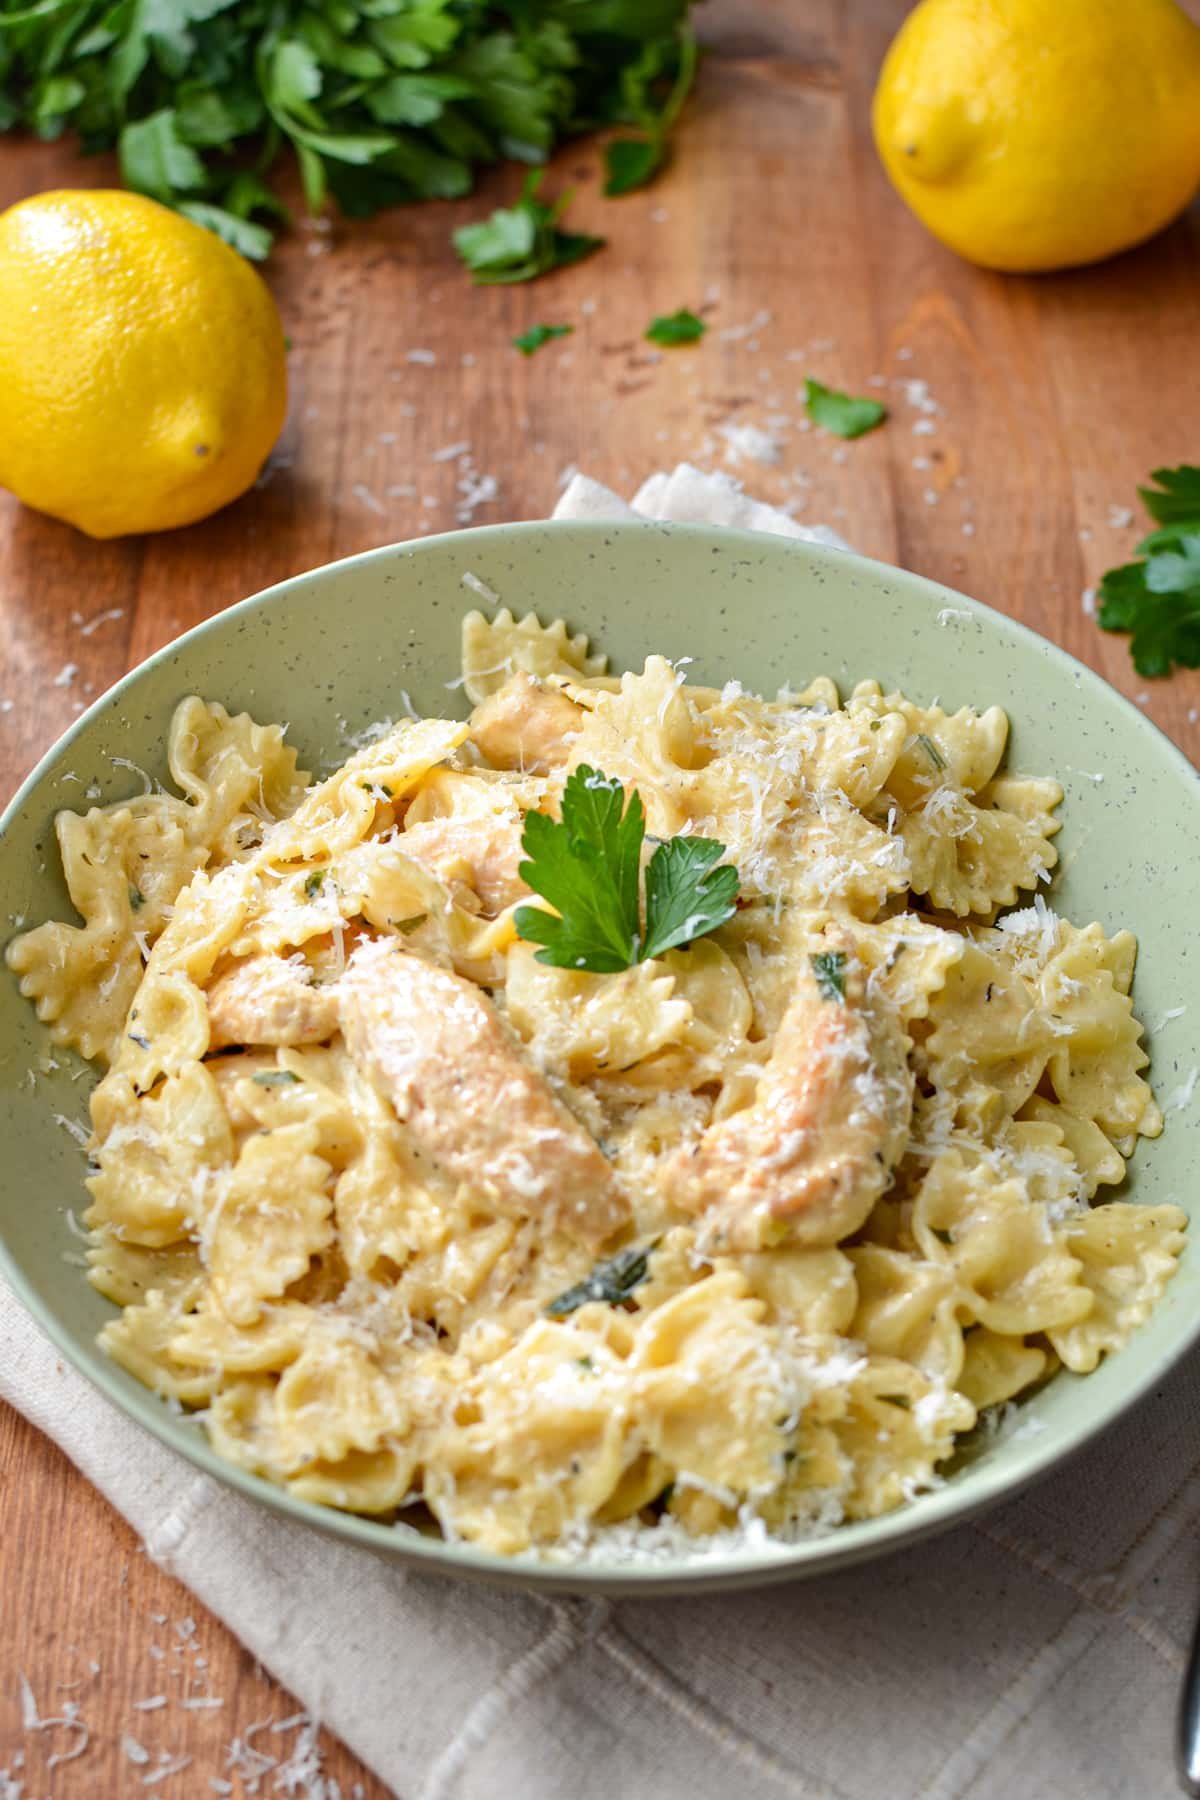 A bowl of farfalle pasta with a creamy sauce.